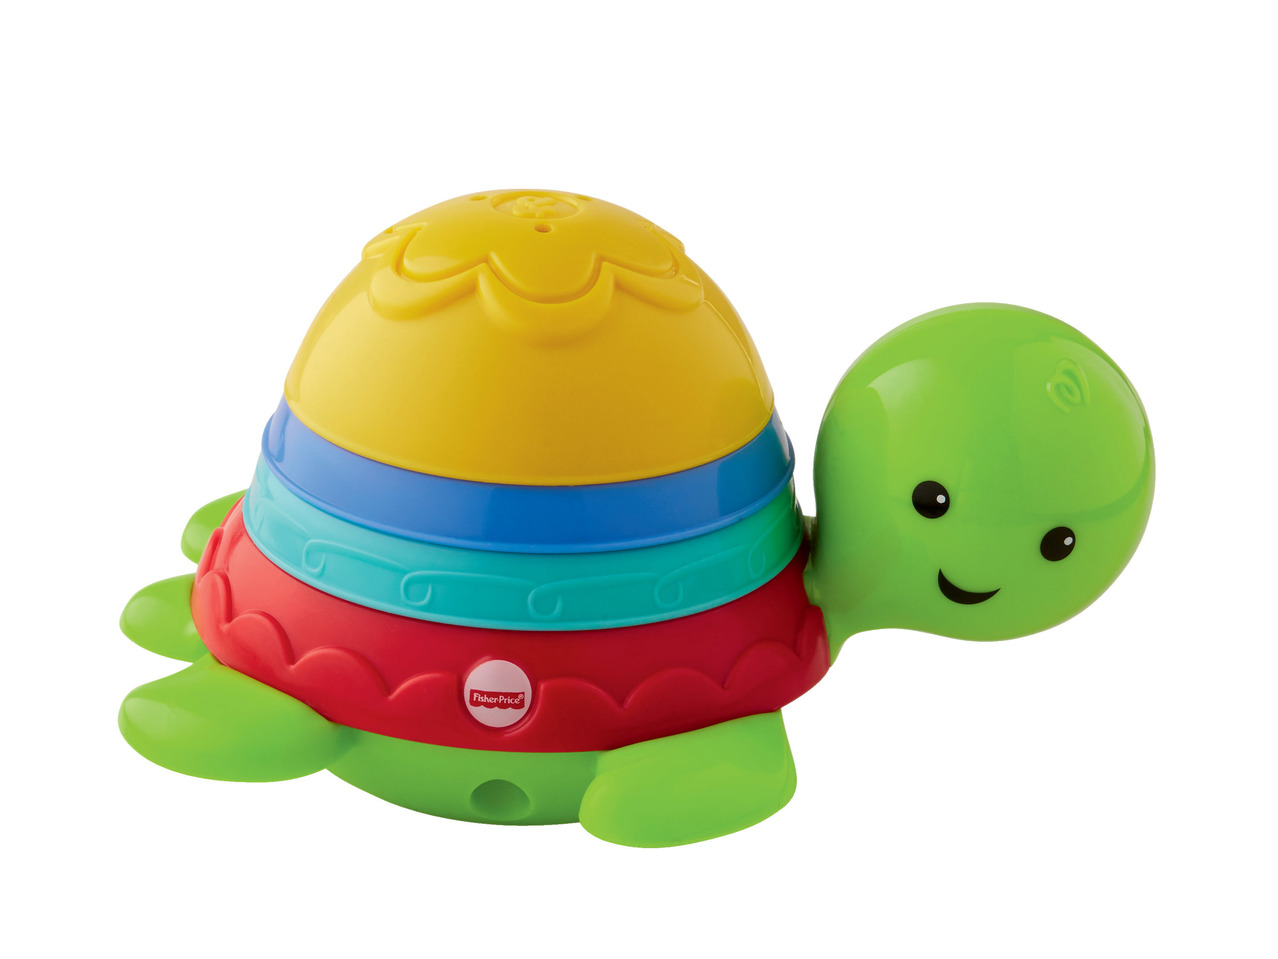 FISHER-PRICE Baby Toys Assortment